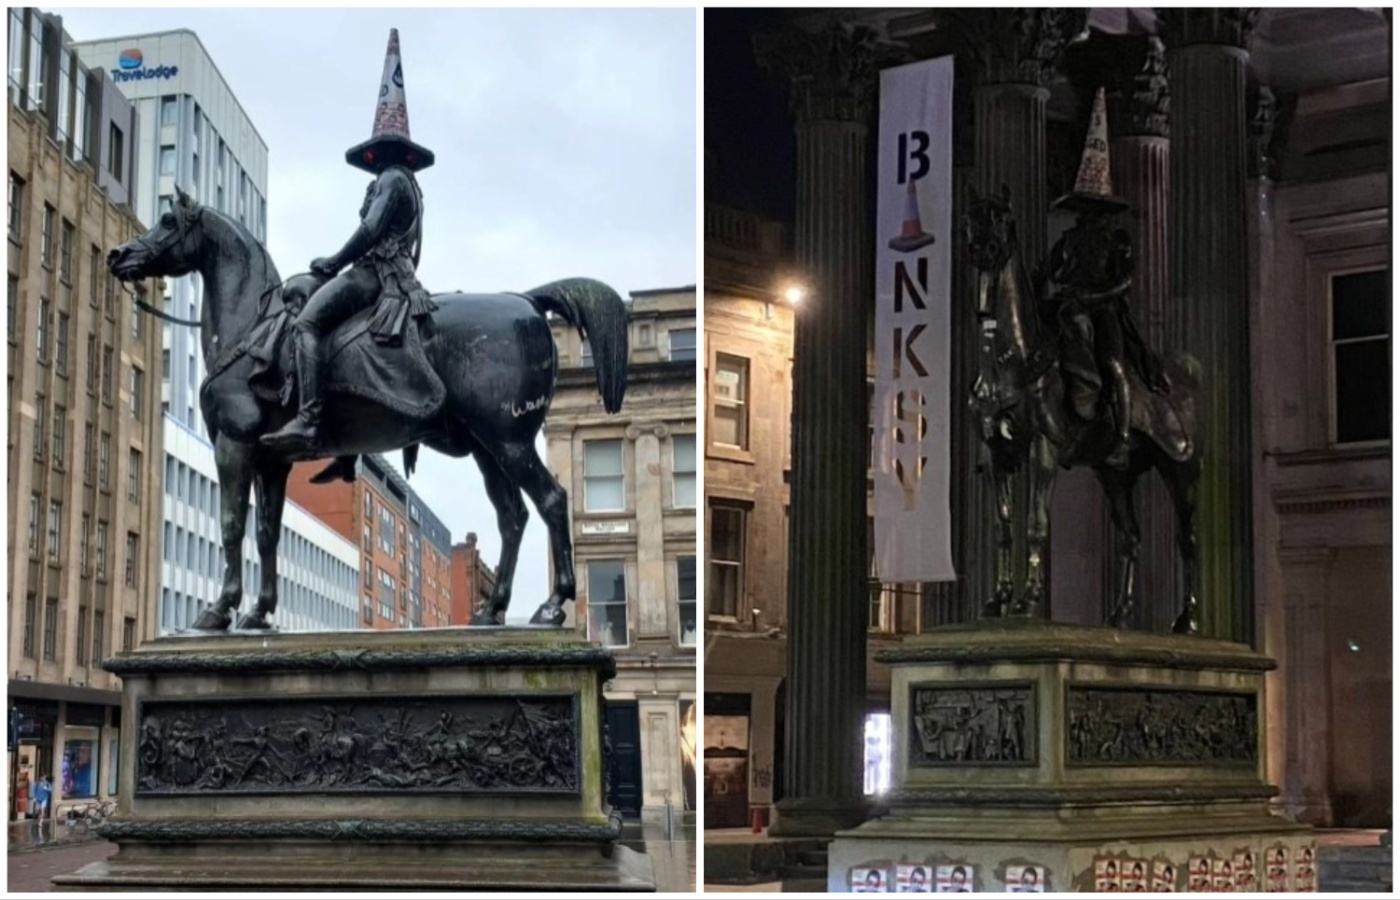 The cone on the Duke of Wellington statue has been replaced by This Is Rigged.